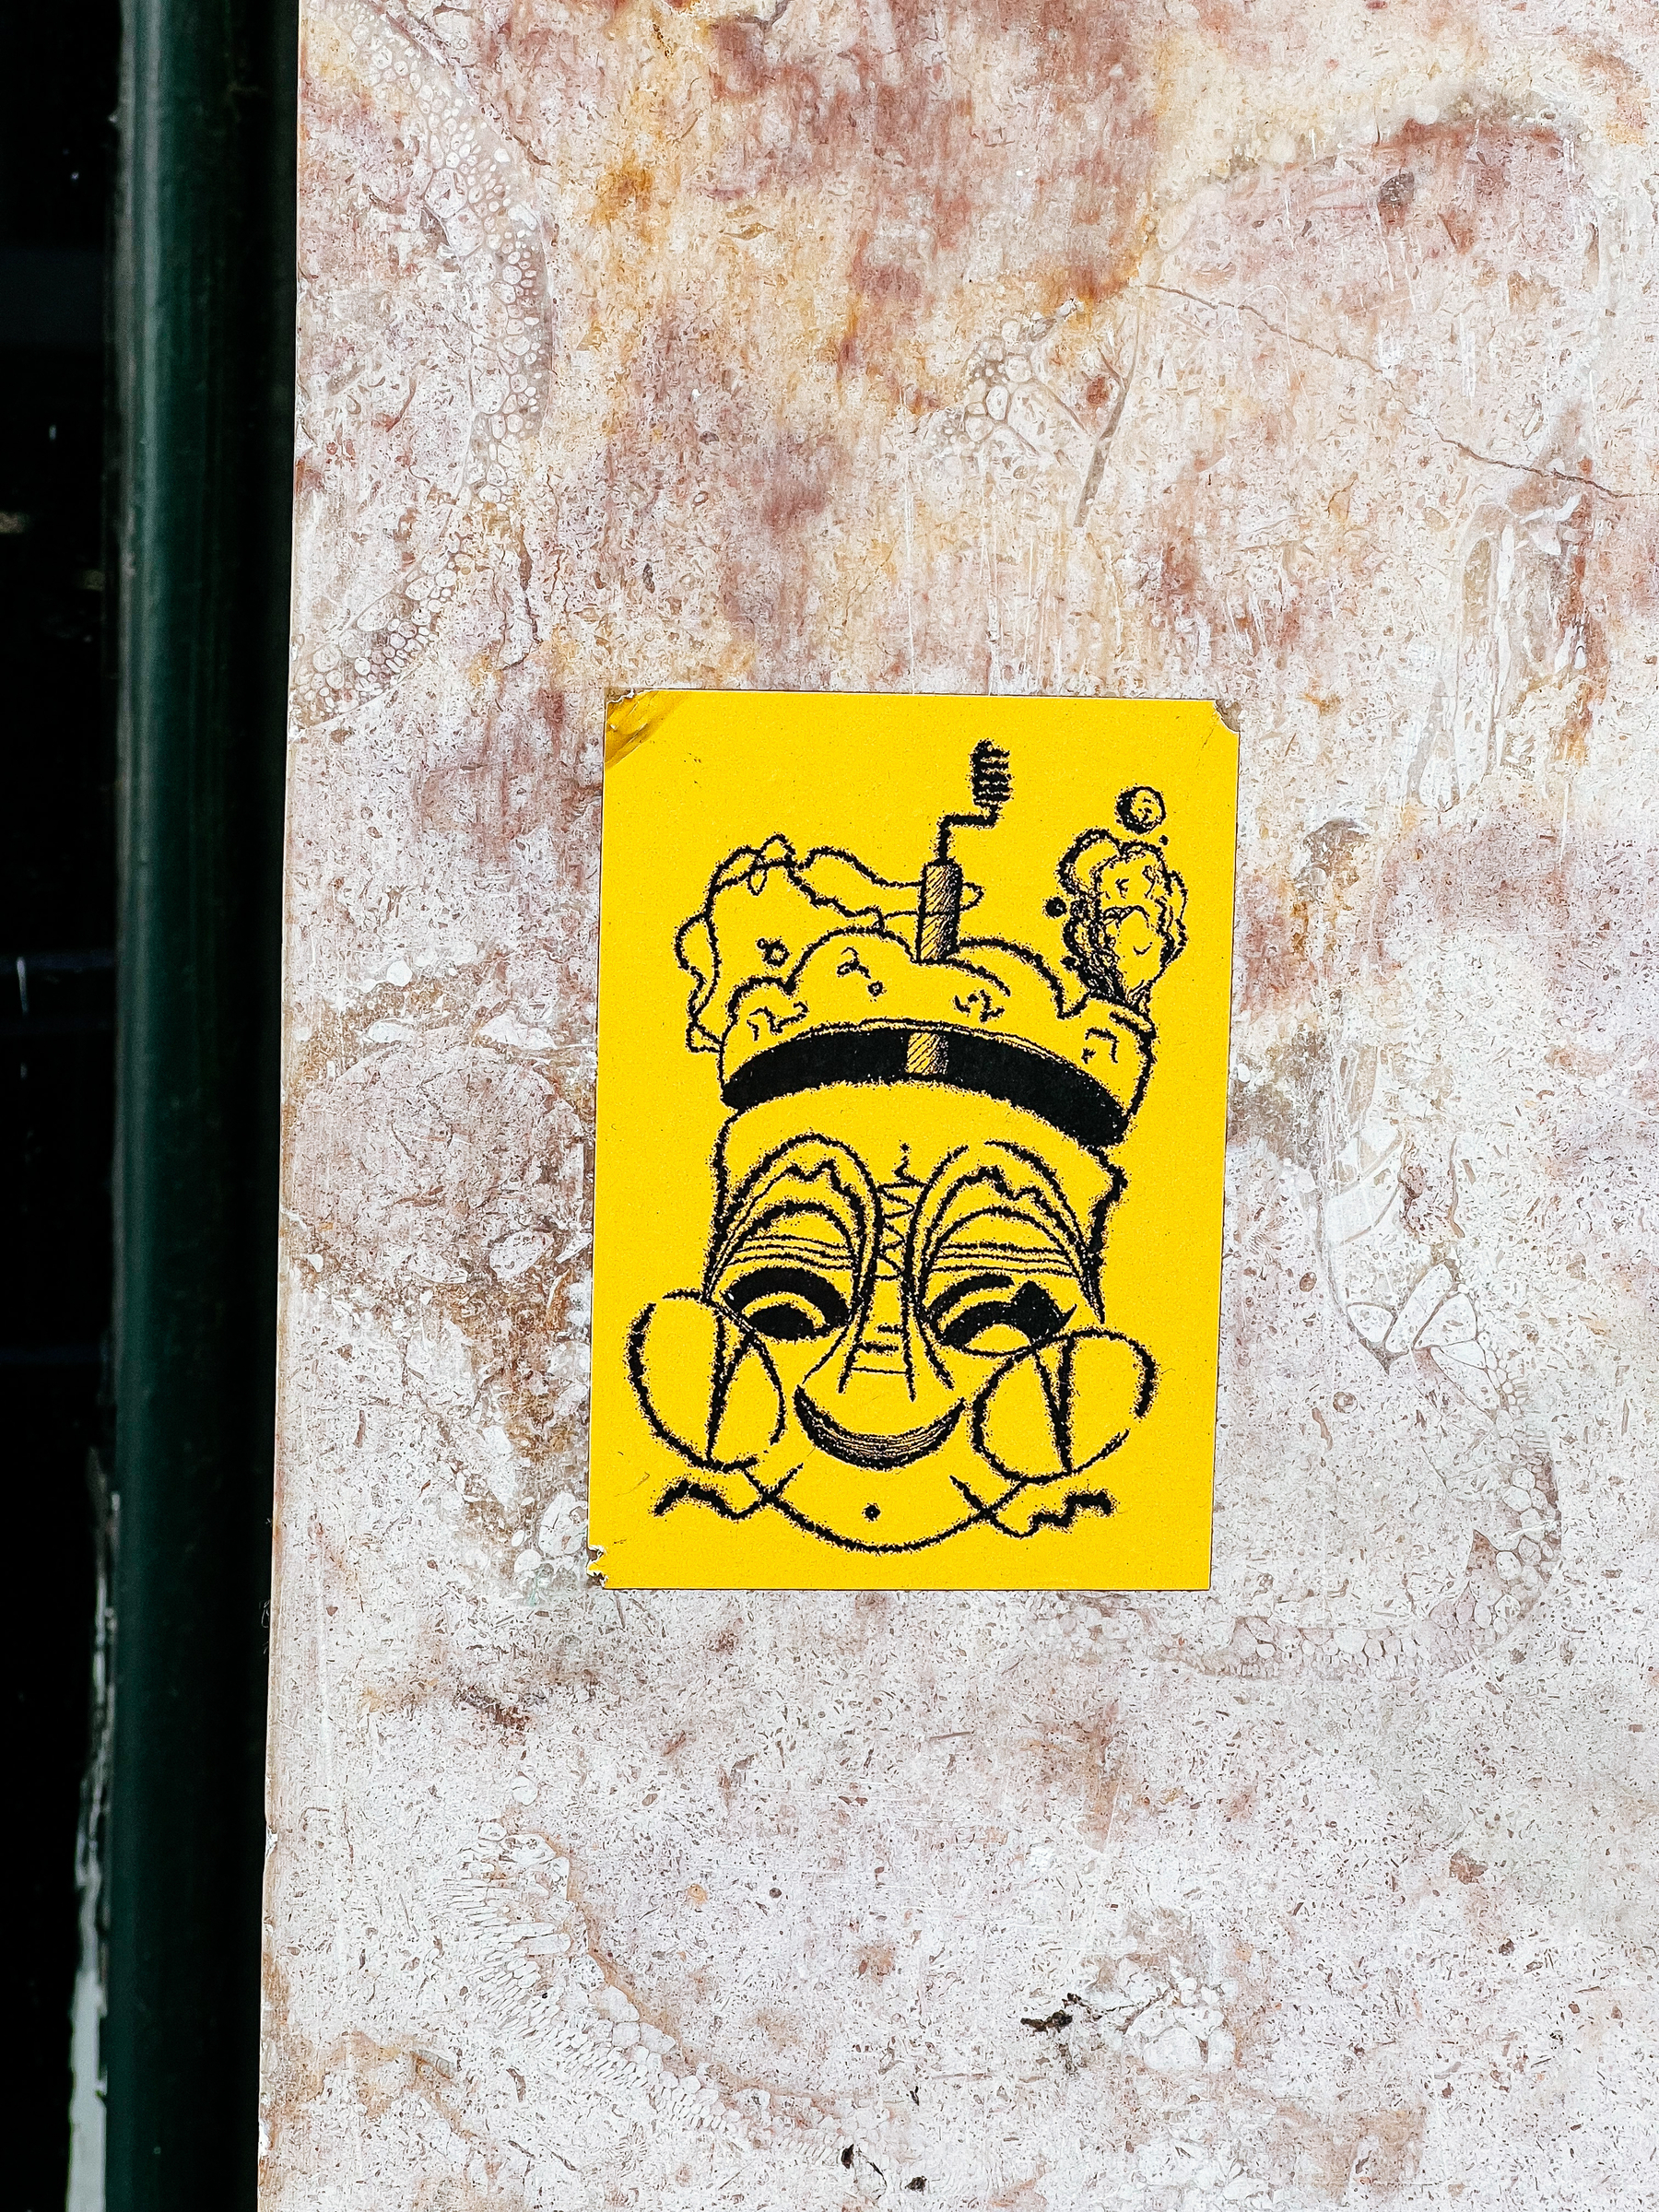 Sticker of a face, on a yellow background. The face is drawn with heavily pixelated lines. 